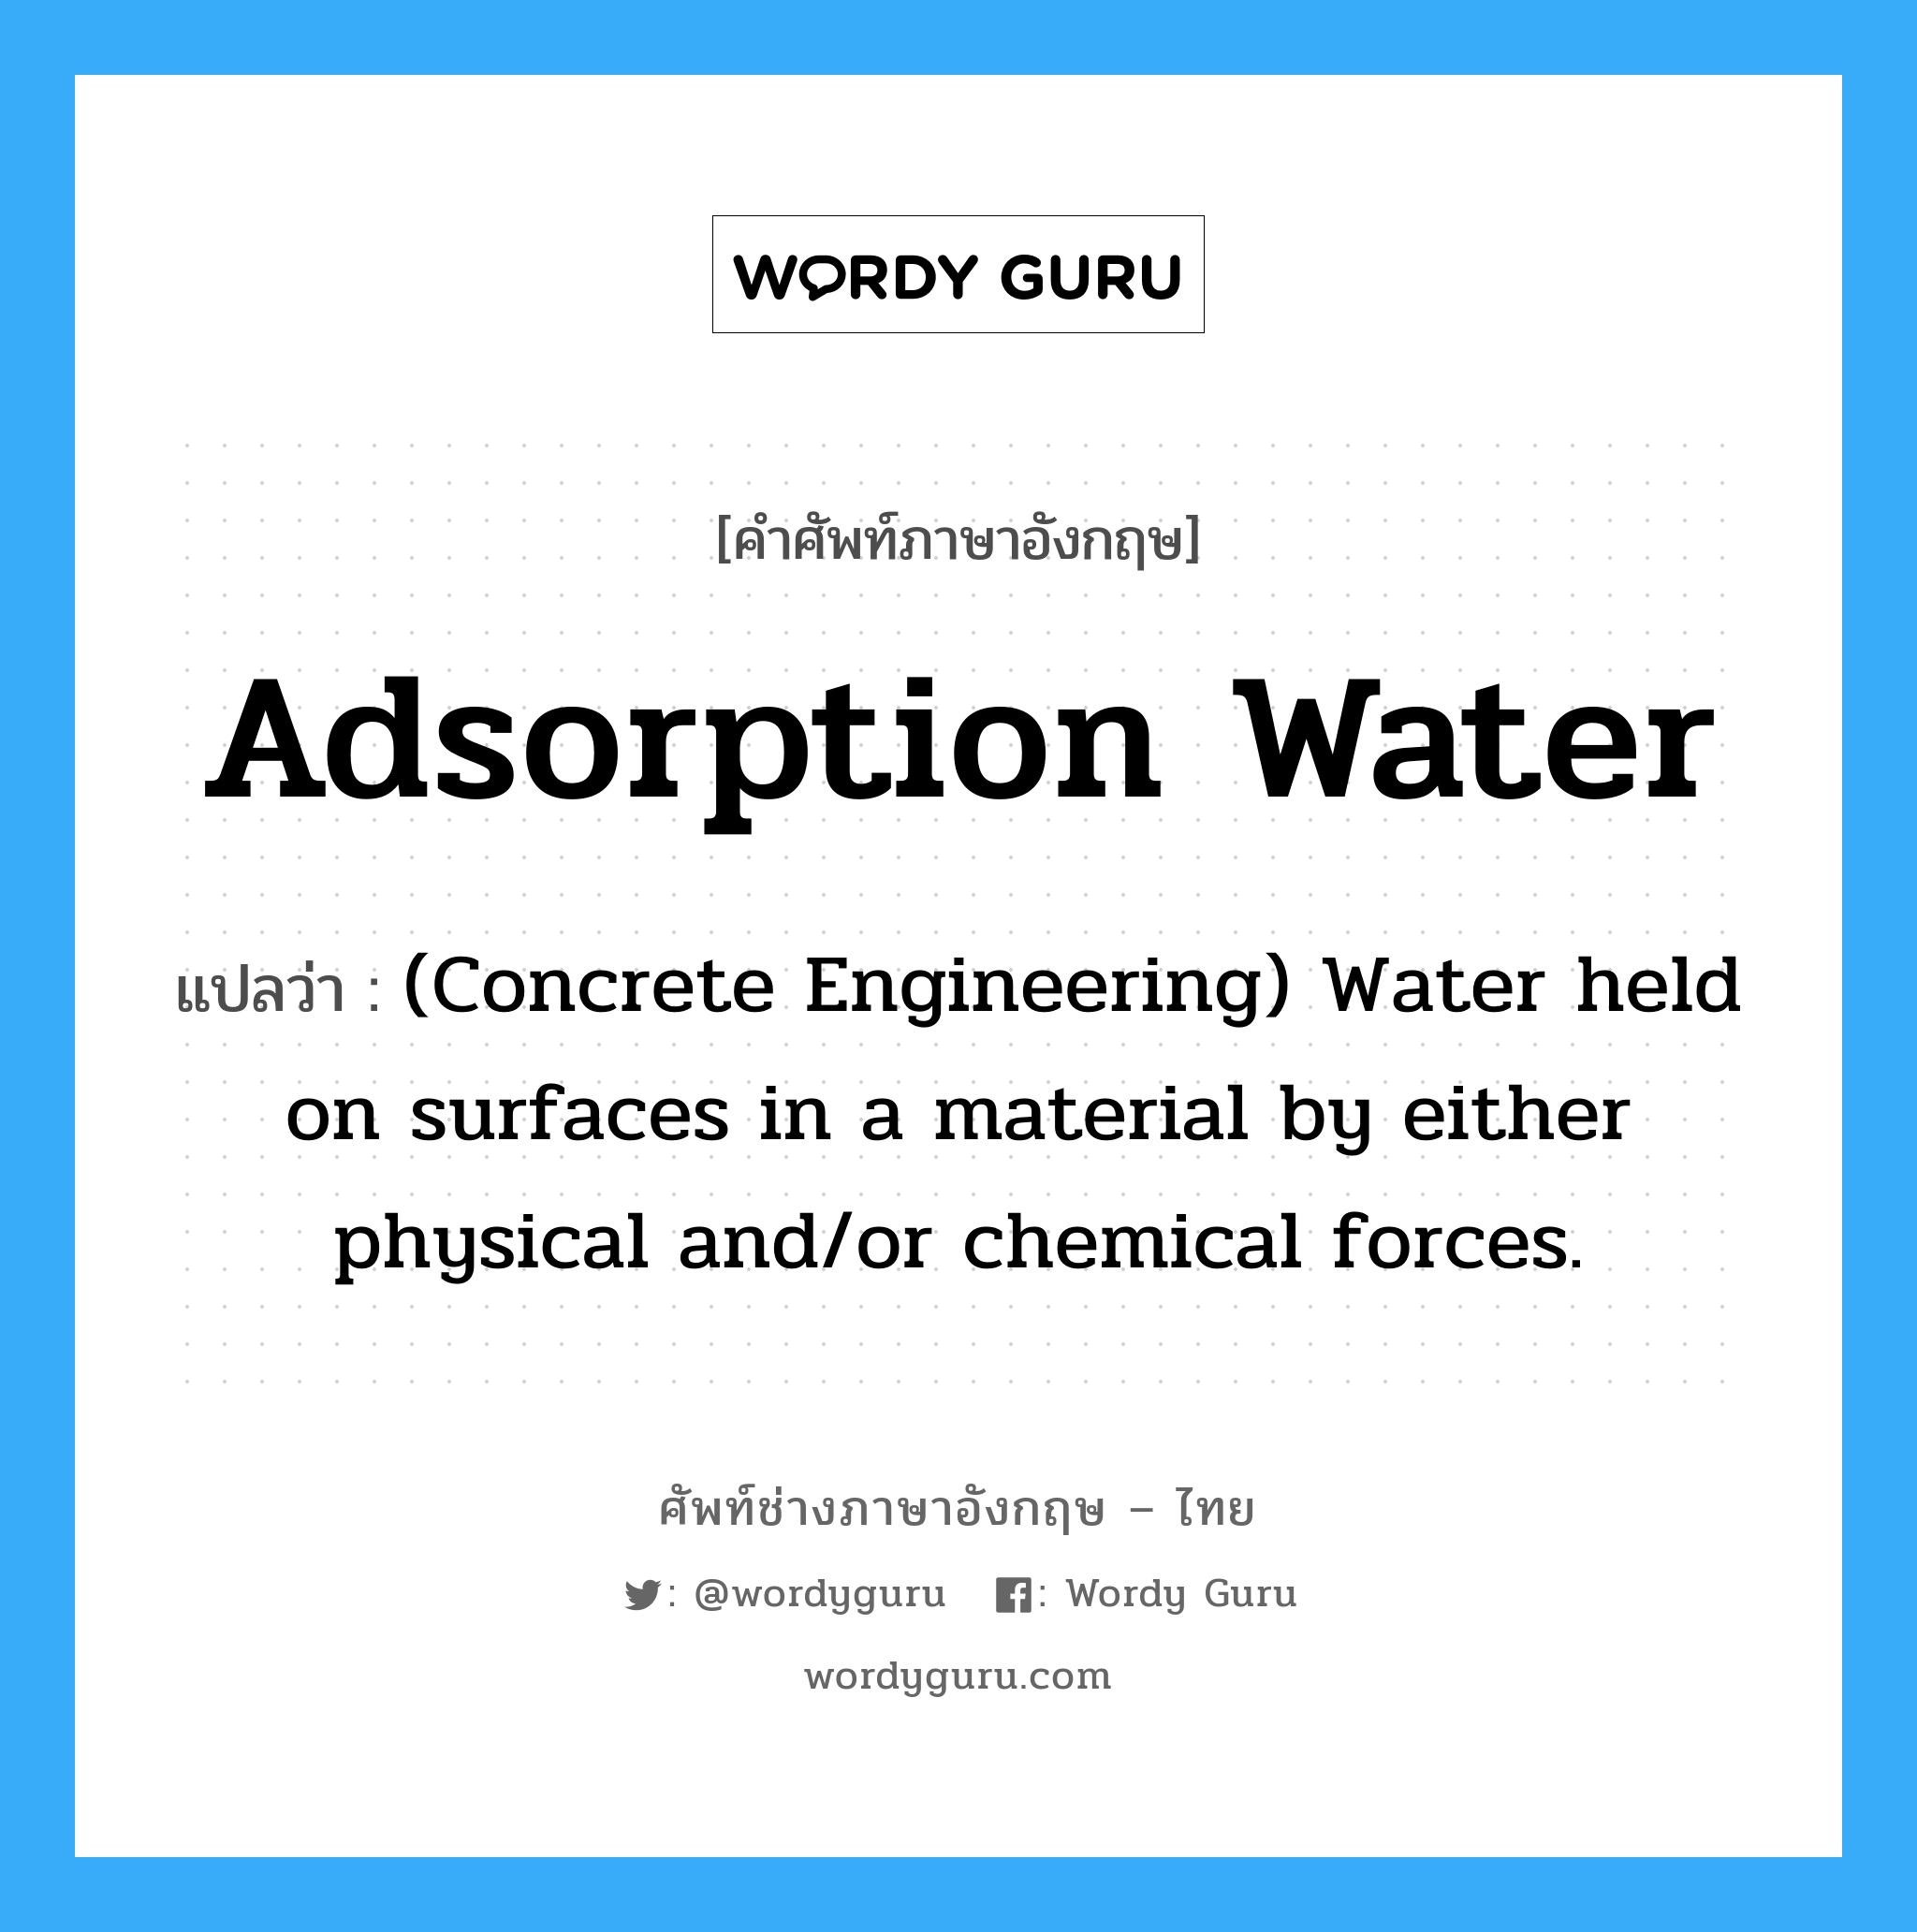 Adsorption Water แปลว่า?, คำศัพท์ช่างภาษาอังกฤษ - ไทย Adsorption Water คำศัพท์ภาษาอังกฤษ Adsorption Water แปลว่า (Concrete Engineering) Water held on surfaces in a material by either physical and/or chemical forces.